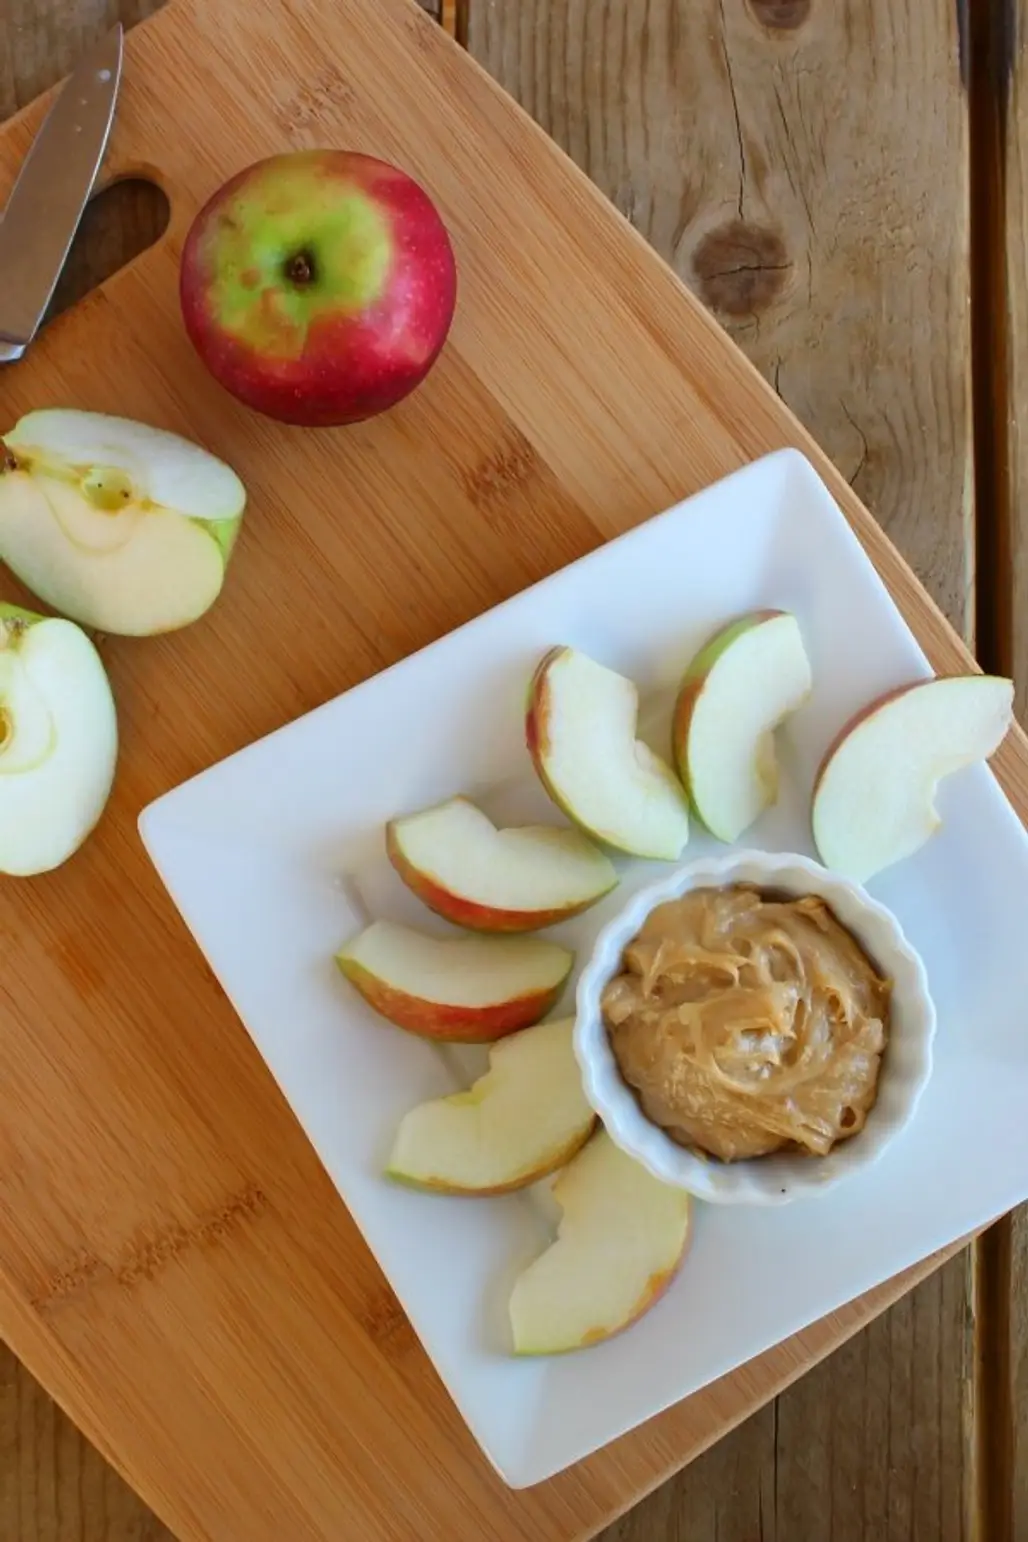 Apples with Peanut Butter